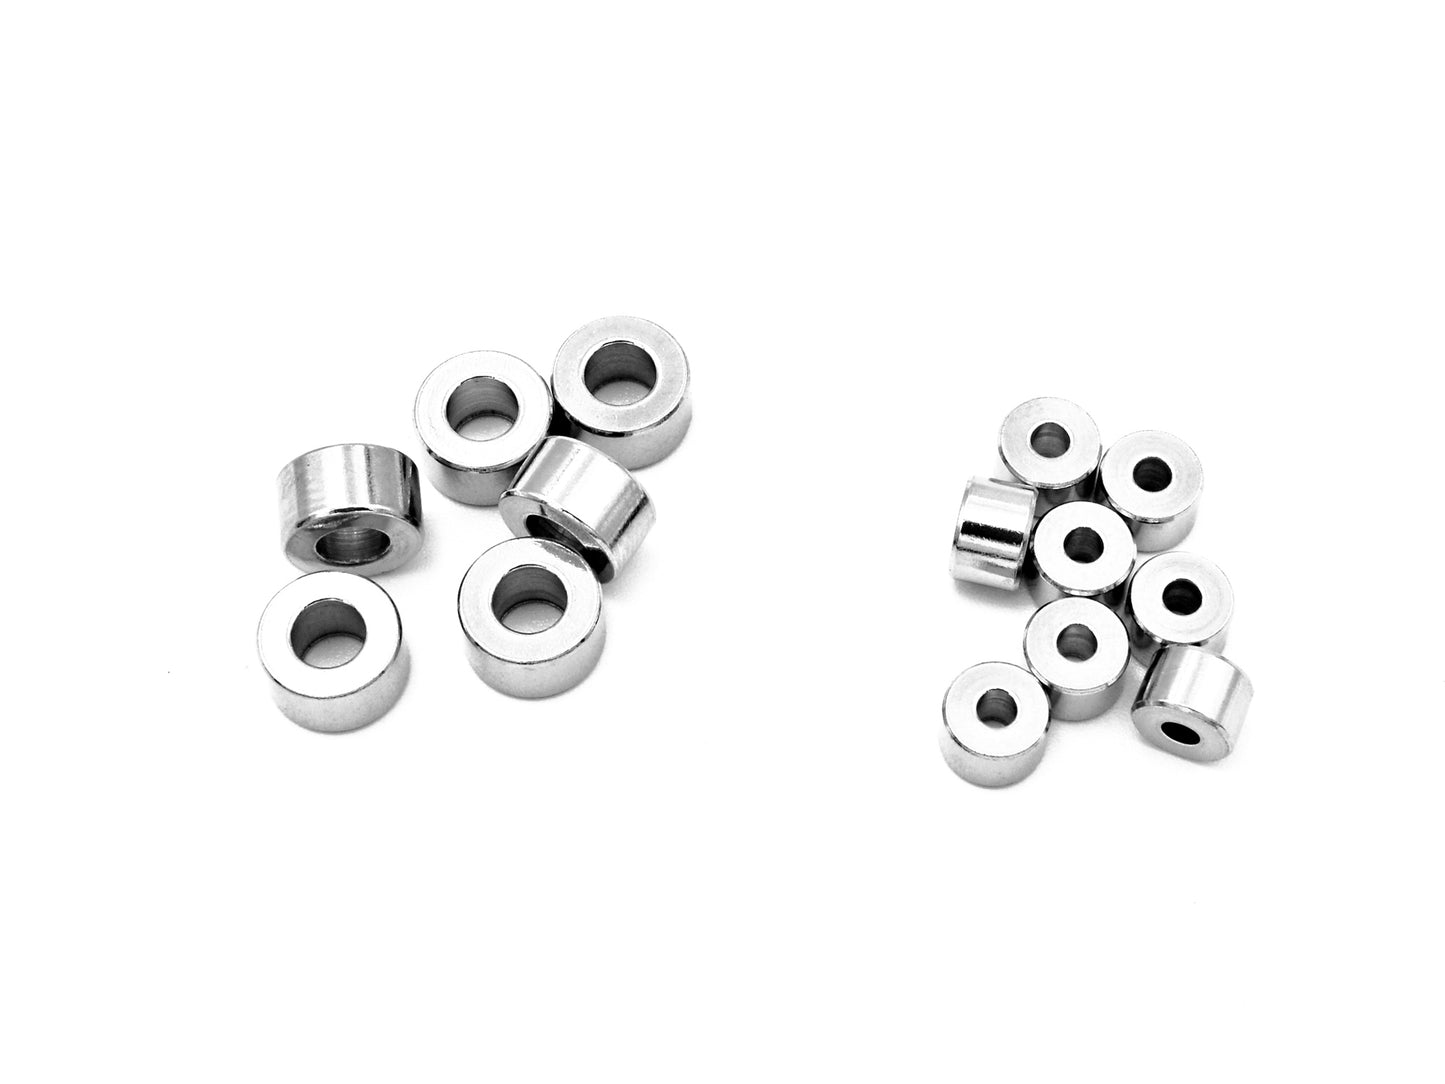 Stainless Steel Cylinder Roundel Plain Spacer Beads Size 6x4mm, 8x4mm Jewelry Finding Supply For Jewelry Making